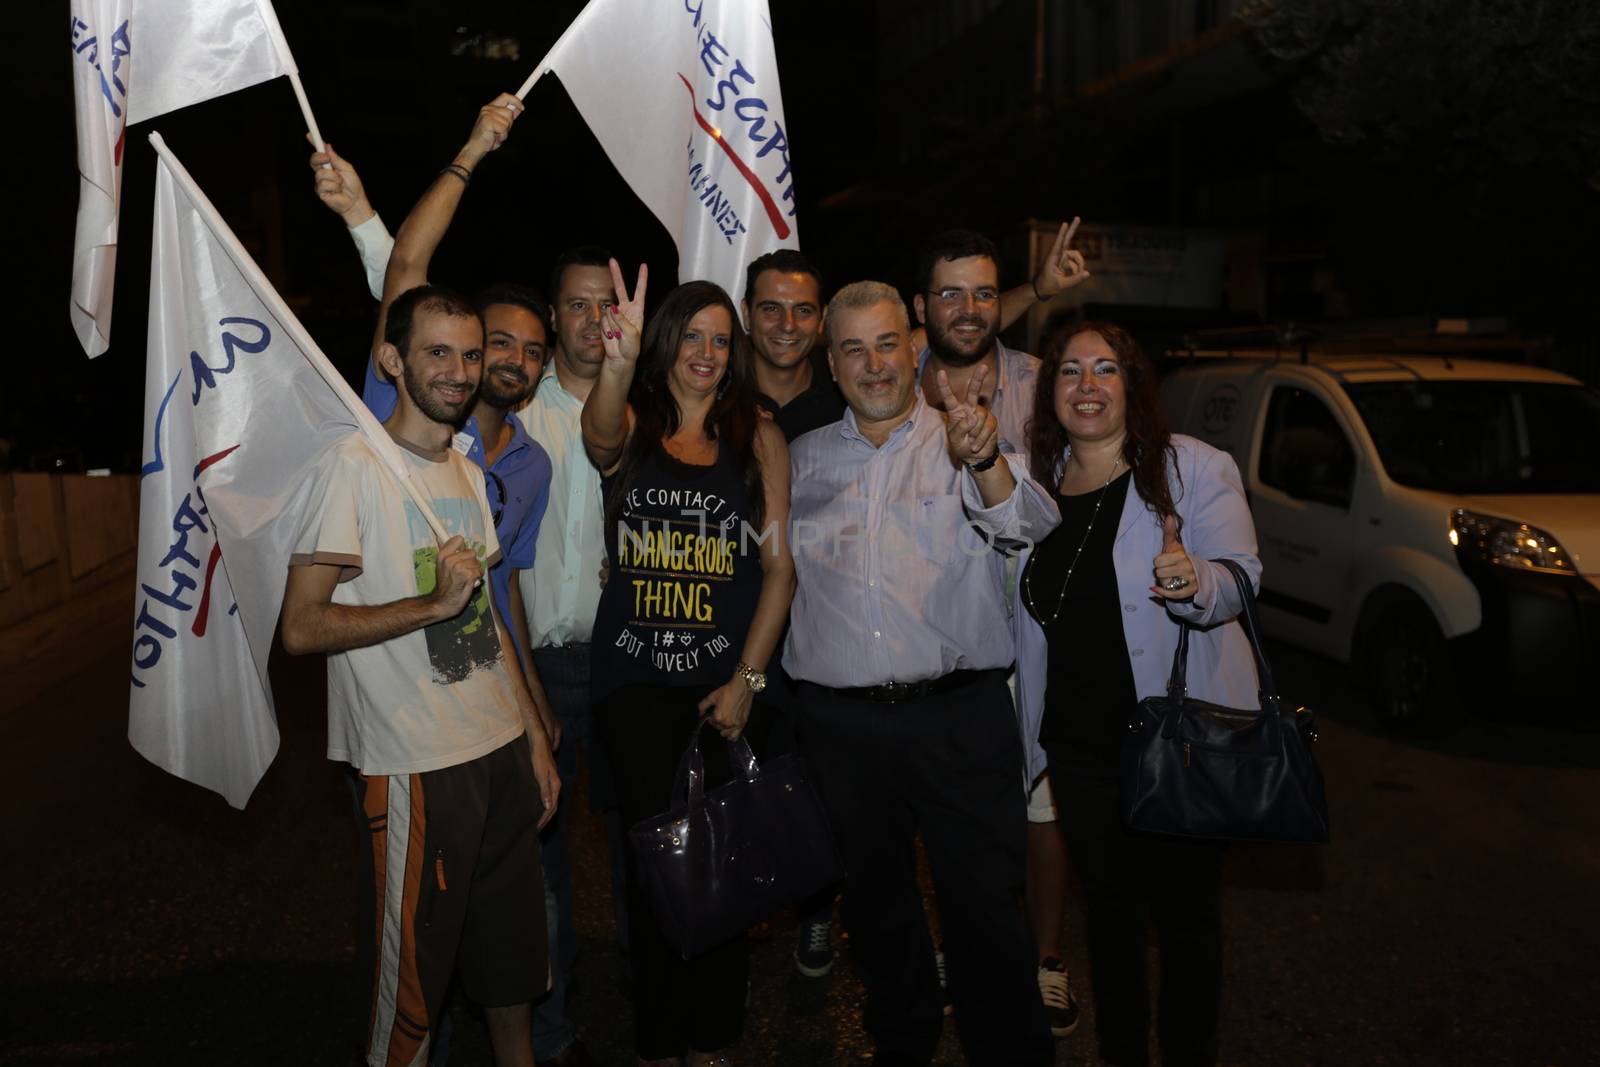 GREECE, Athens: Independent Greeks supporters pose with party flags in Athens after their party agreed to enter a coalition agreement with victorious Syriza after Greece's parliamentary election on September 20, 2015.